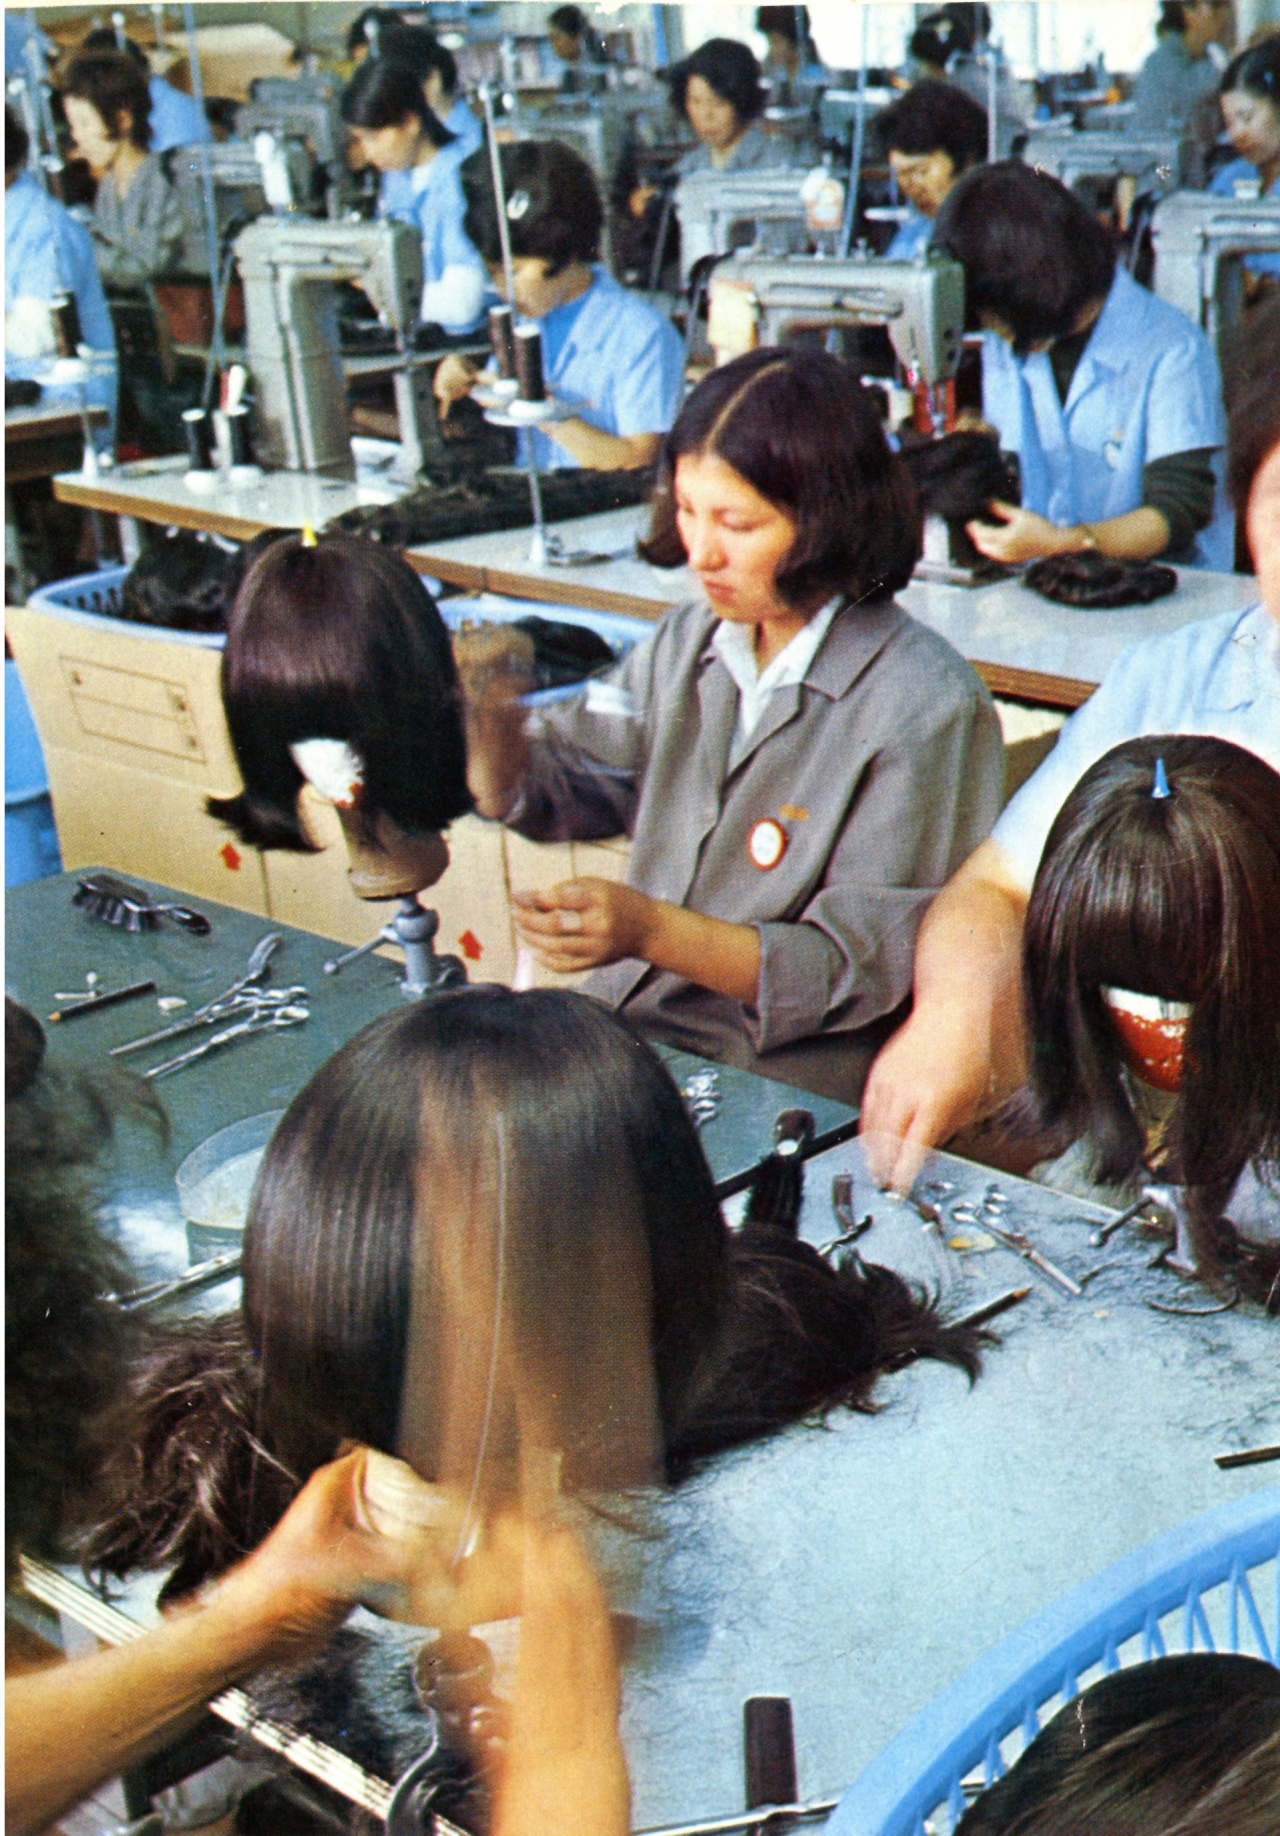 This undated file photo shows workers at a wig factory, which was a major export item for South Korea in the 1960s. (The Korea Herald)